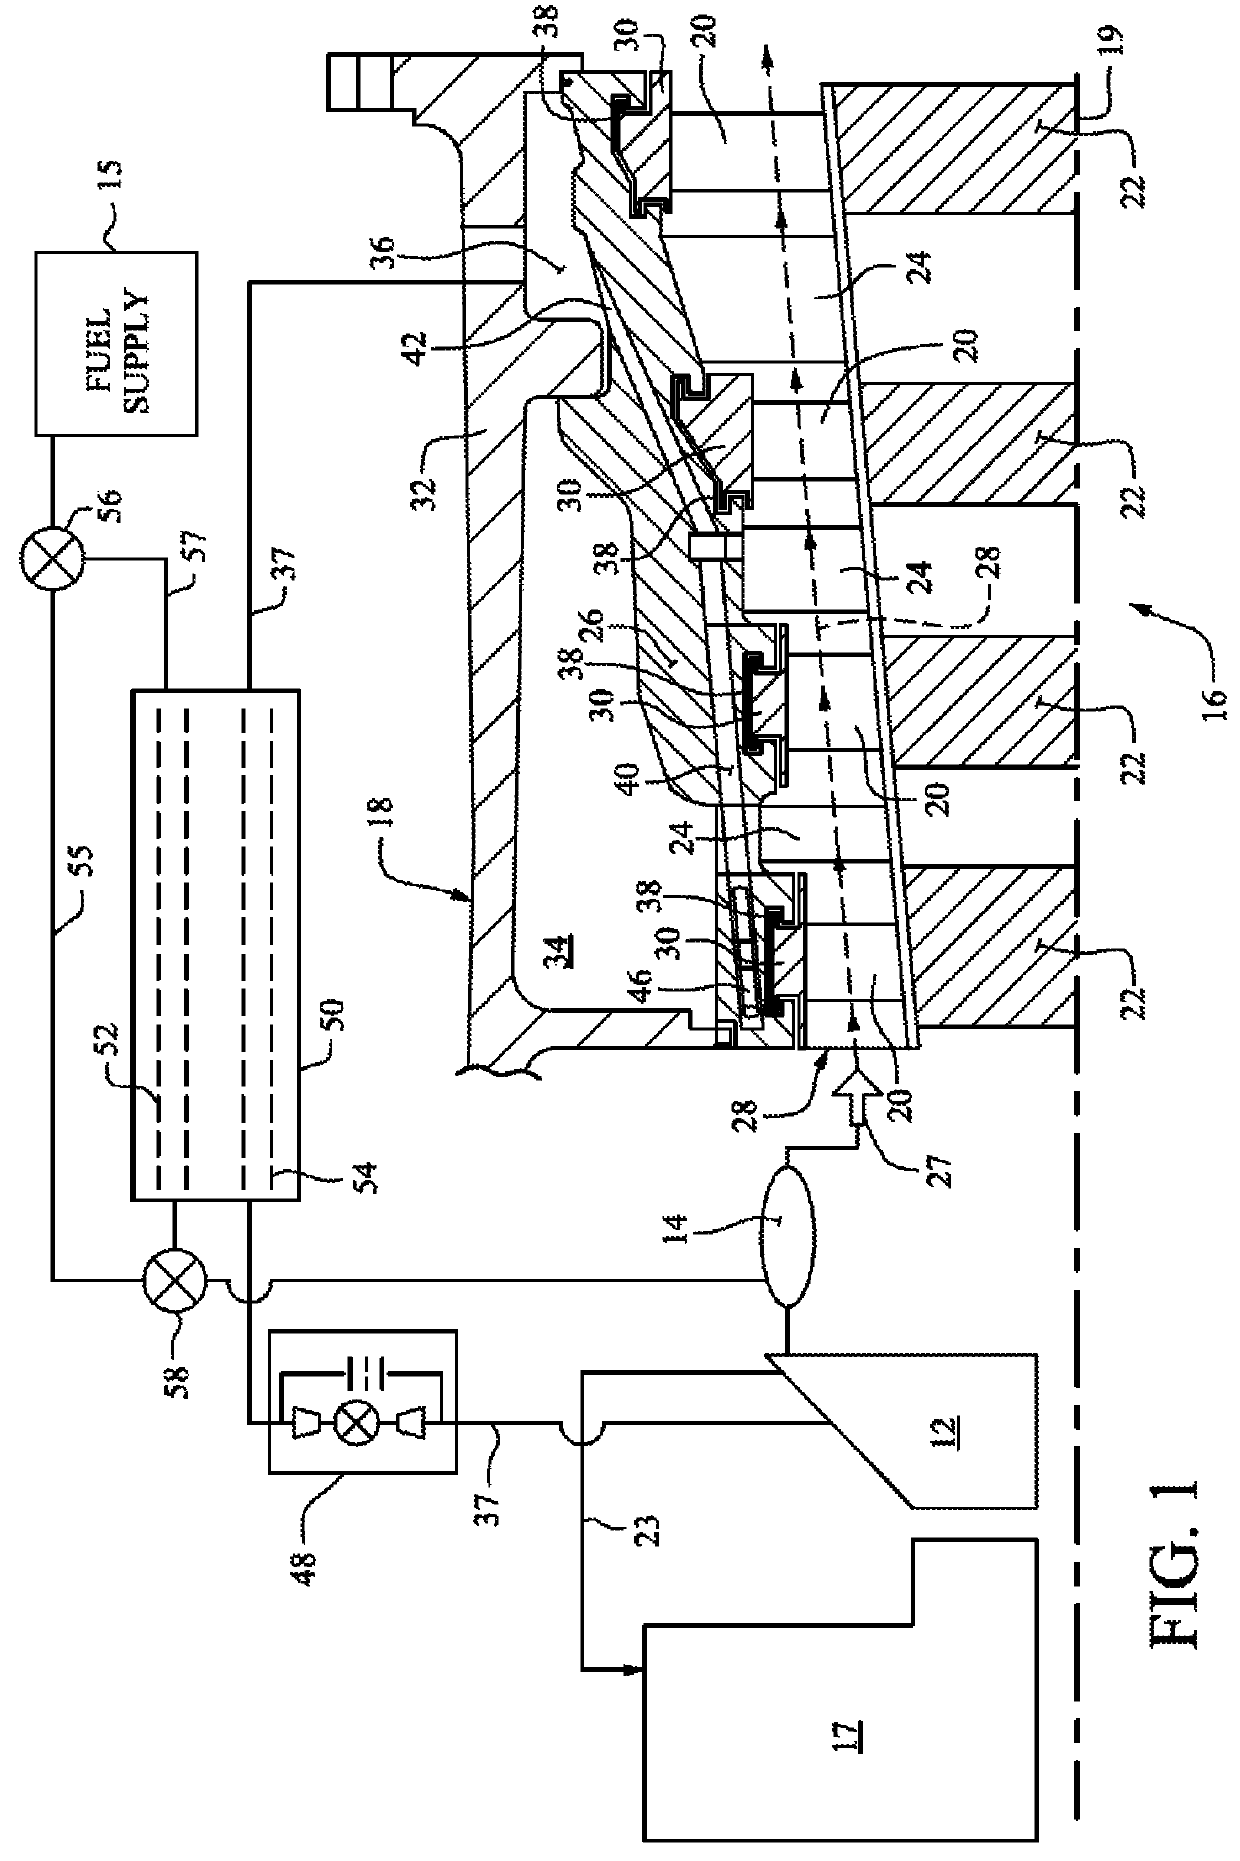 Method and apparatus for clearance control utilizing fuel heating